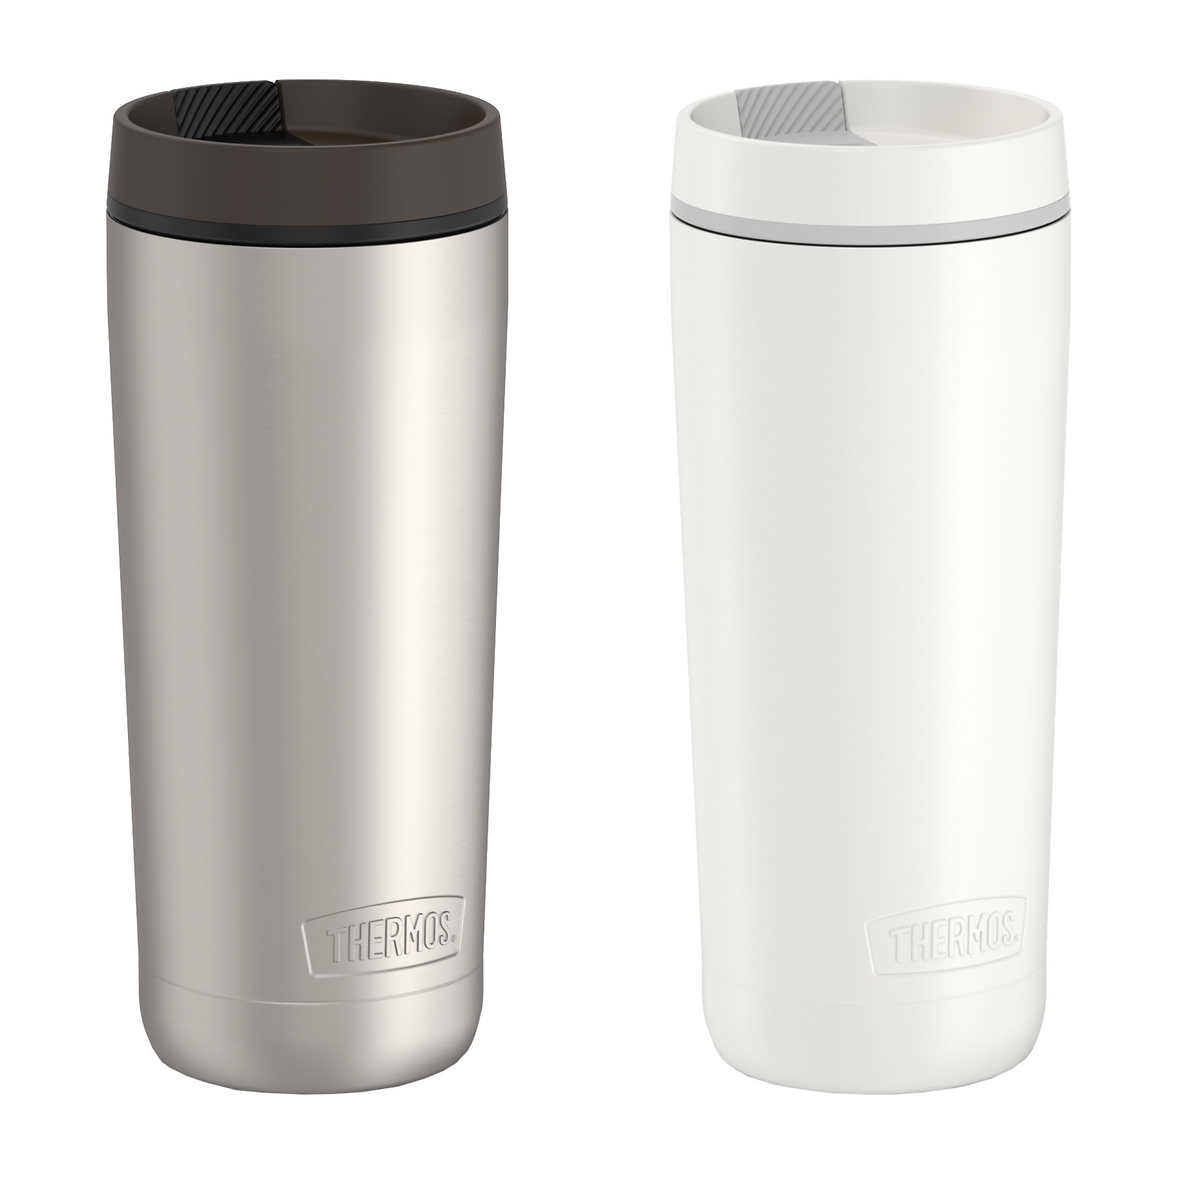 https://theseason.com/image/cache/products/2021/11/thermos-vacuum-stainless-steel-18oz-travel-tumbler-2pack-white-1450605092-1200x1200.jpg